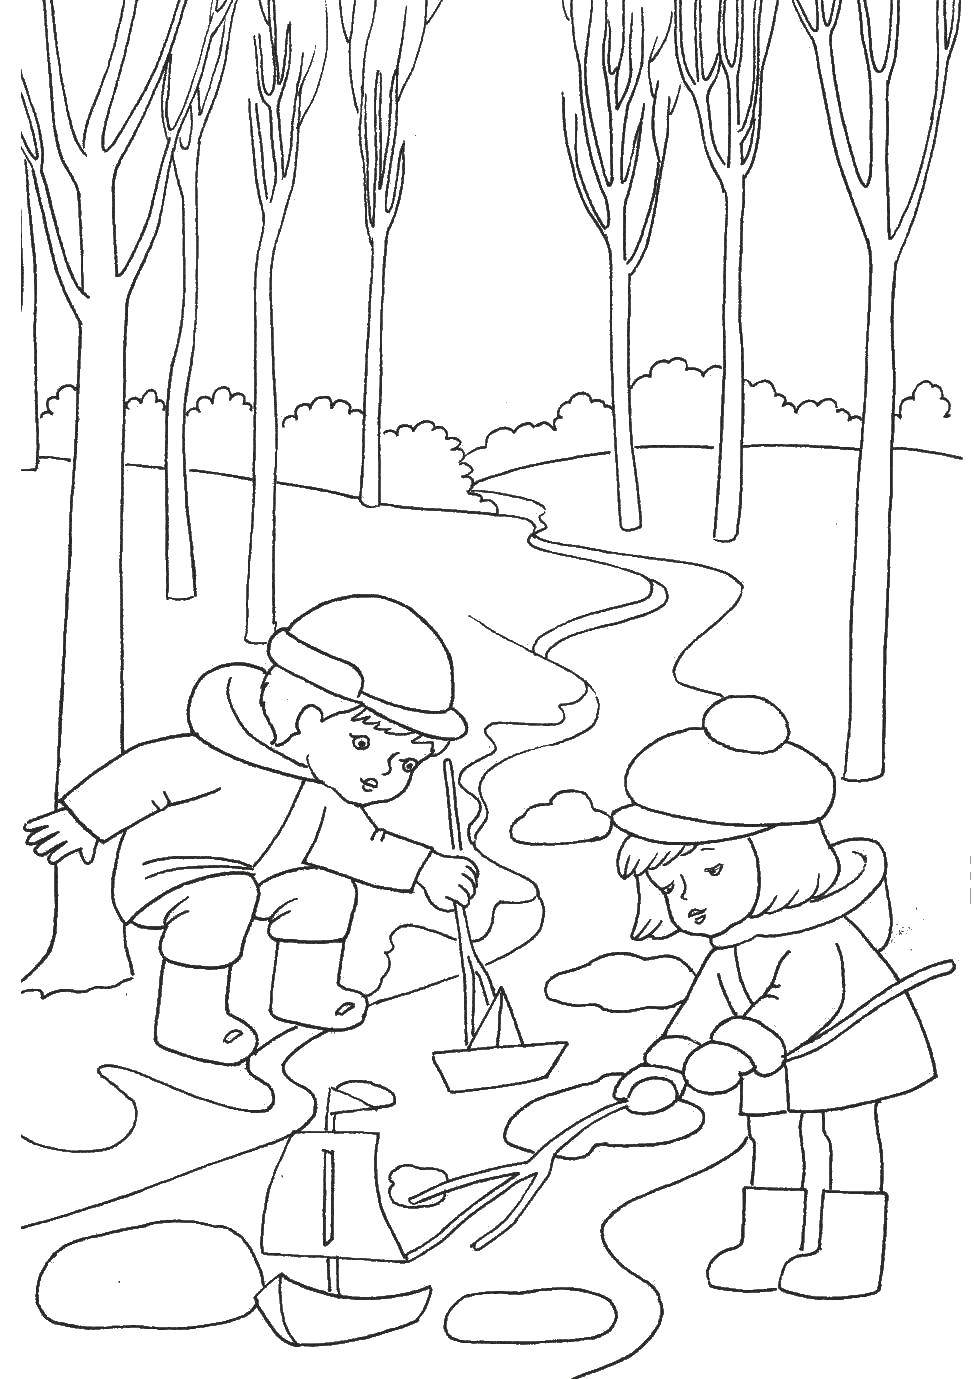 Coloring Brook and the kids. Category stream. Tags:  the Creek, children, spring.